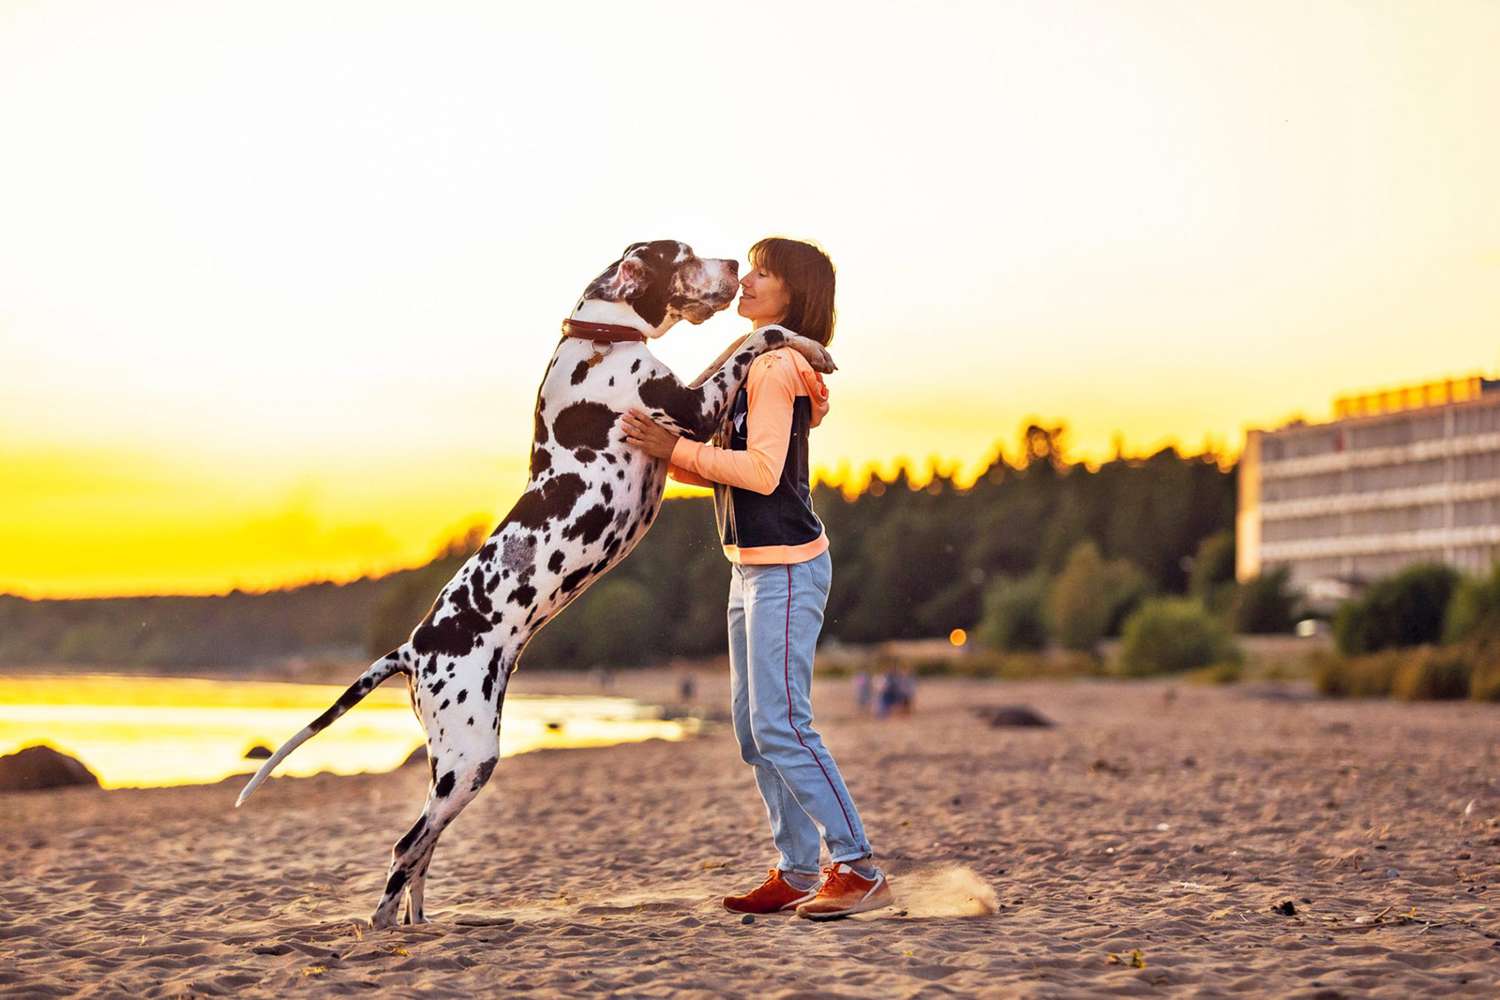 The 14 Tallest Dog Breeds Who Can Easily Look You In the Eye | Daily Paws